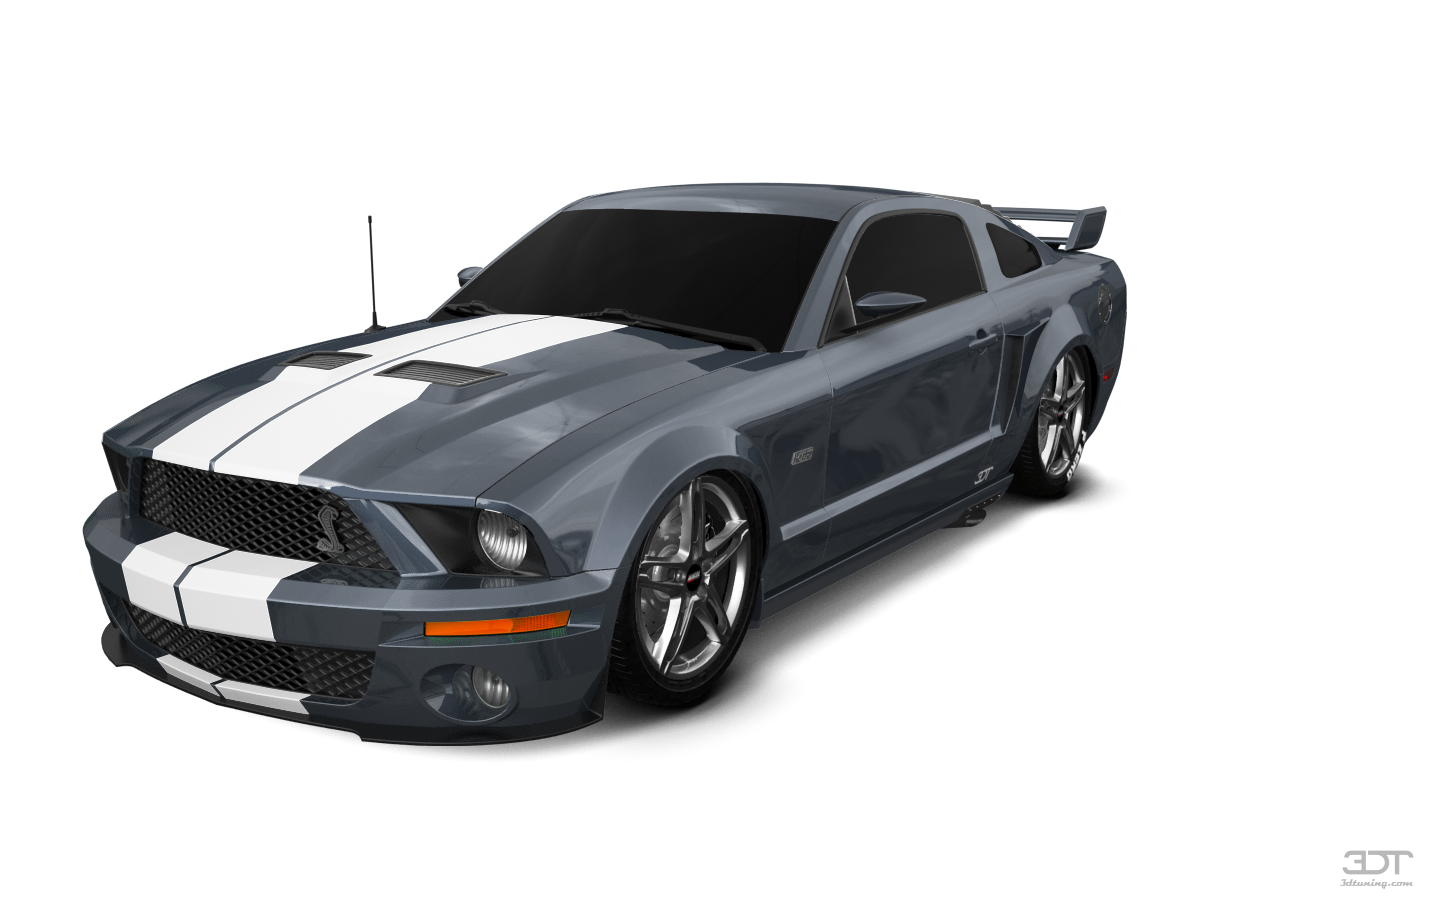 Ford Mustang 2 Door Coupe 2006 tuning